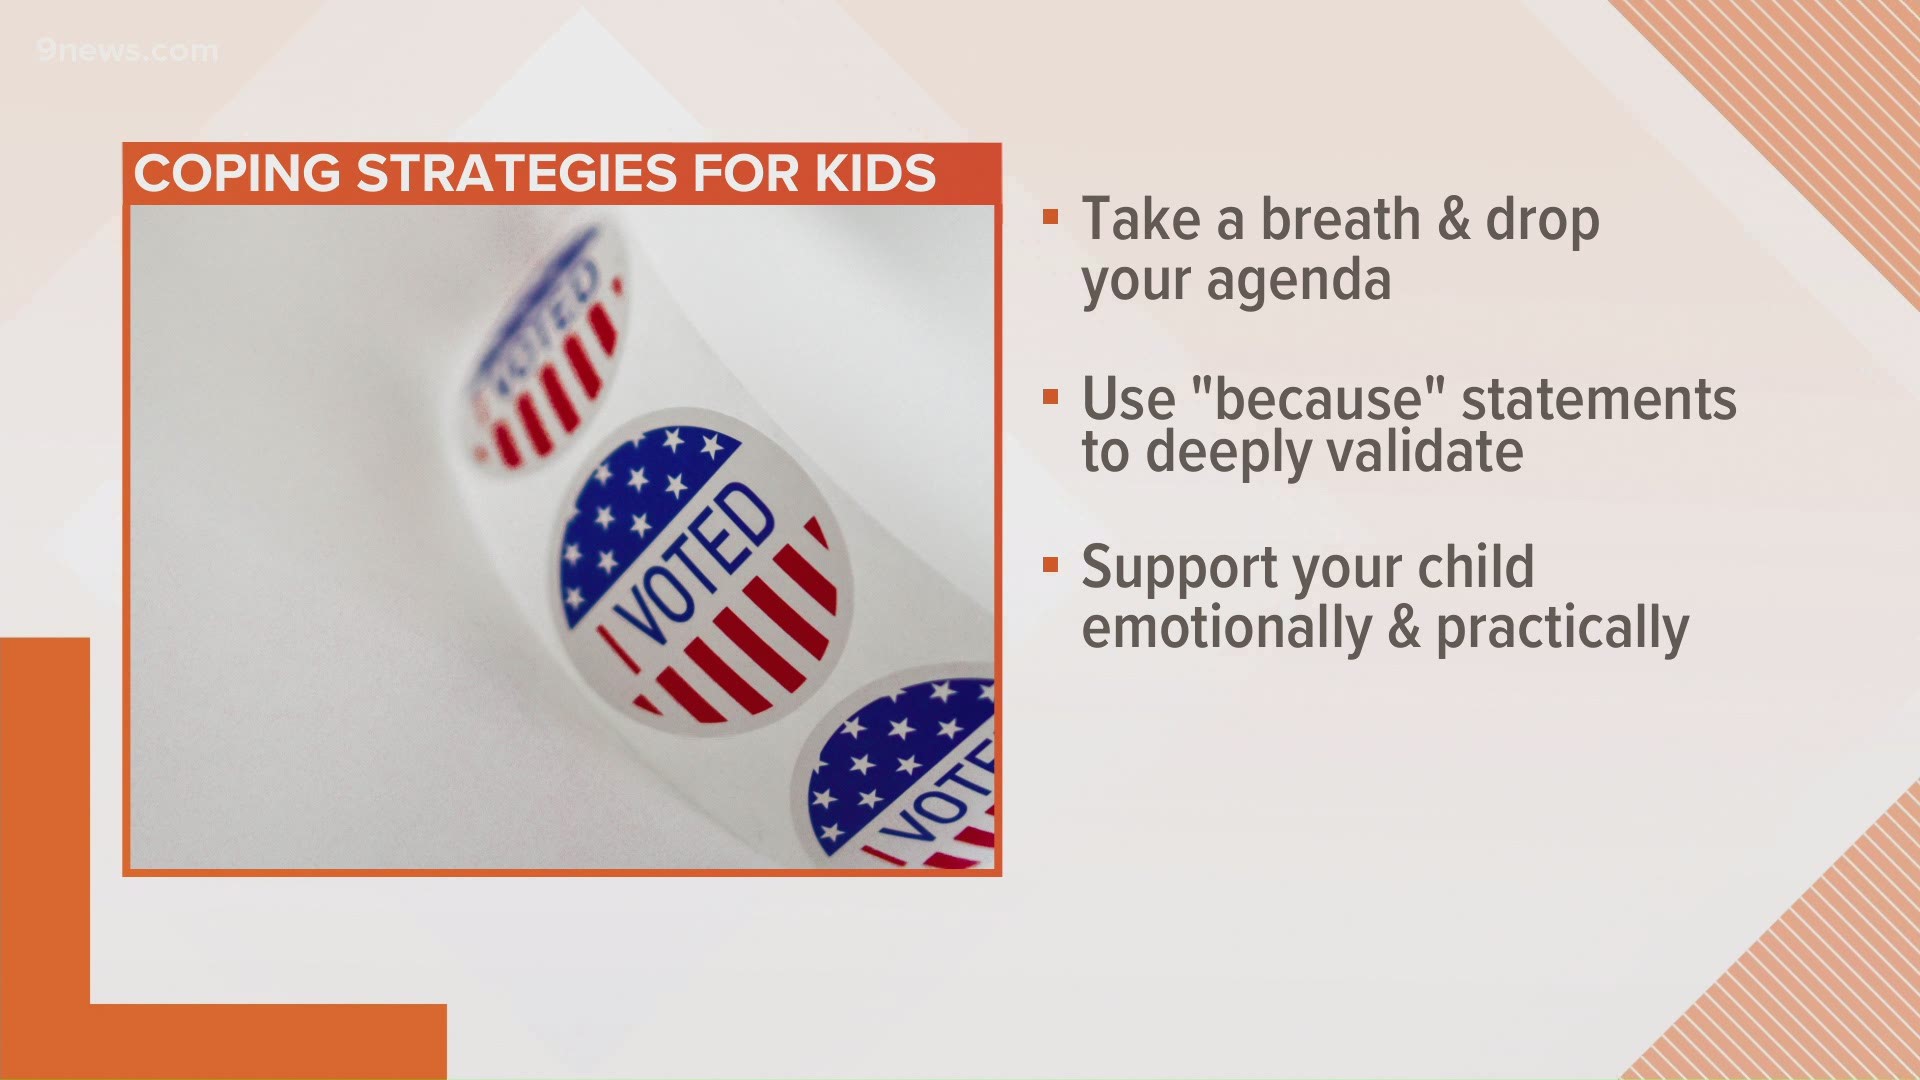 Doctor Elizabeth Easton shares some strategies to keep in mind when dealing with kids and election anxiety.